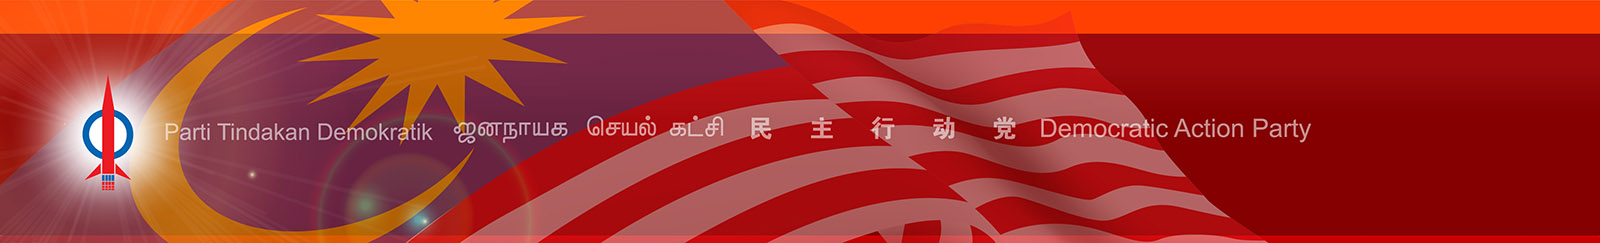 Image with DAP logo and the words - Democratic Action Party